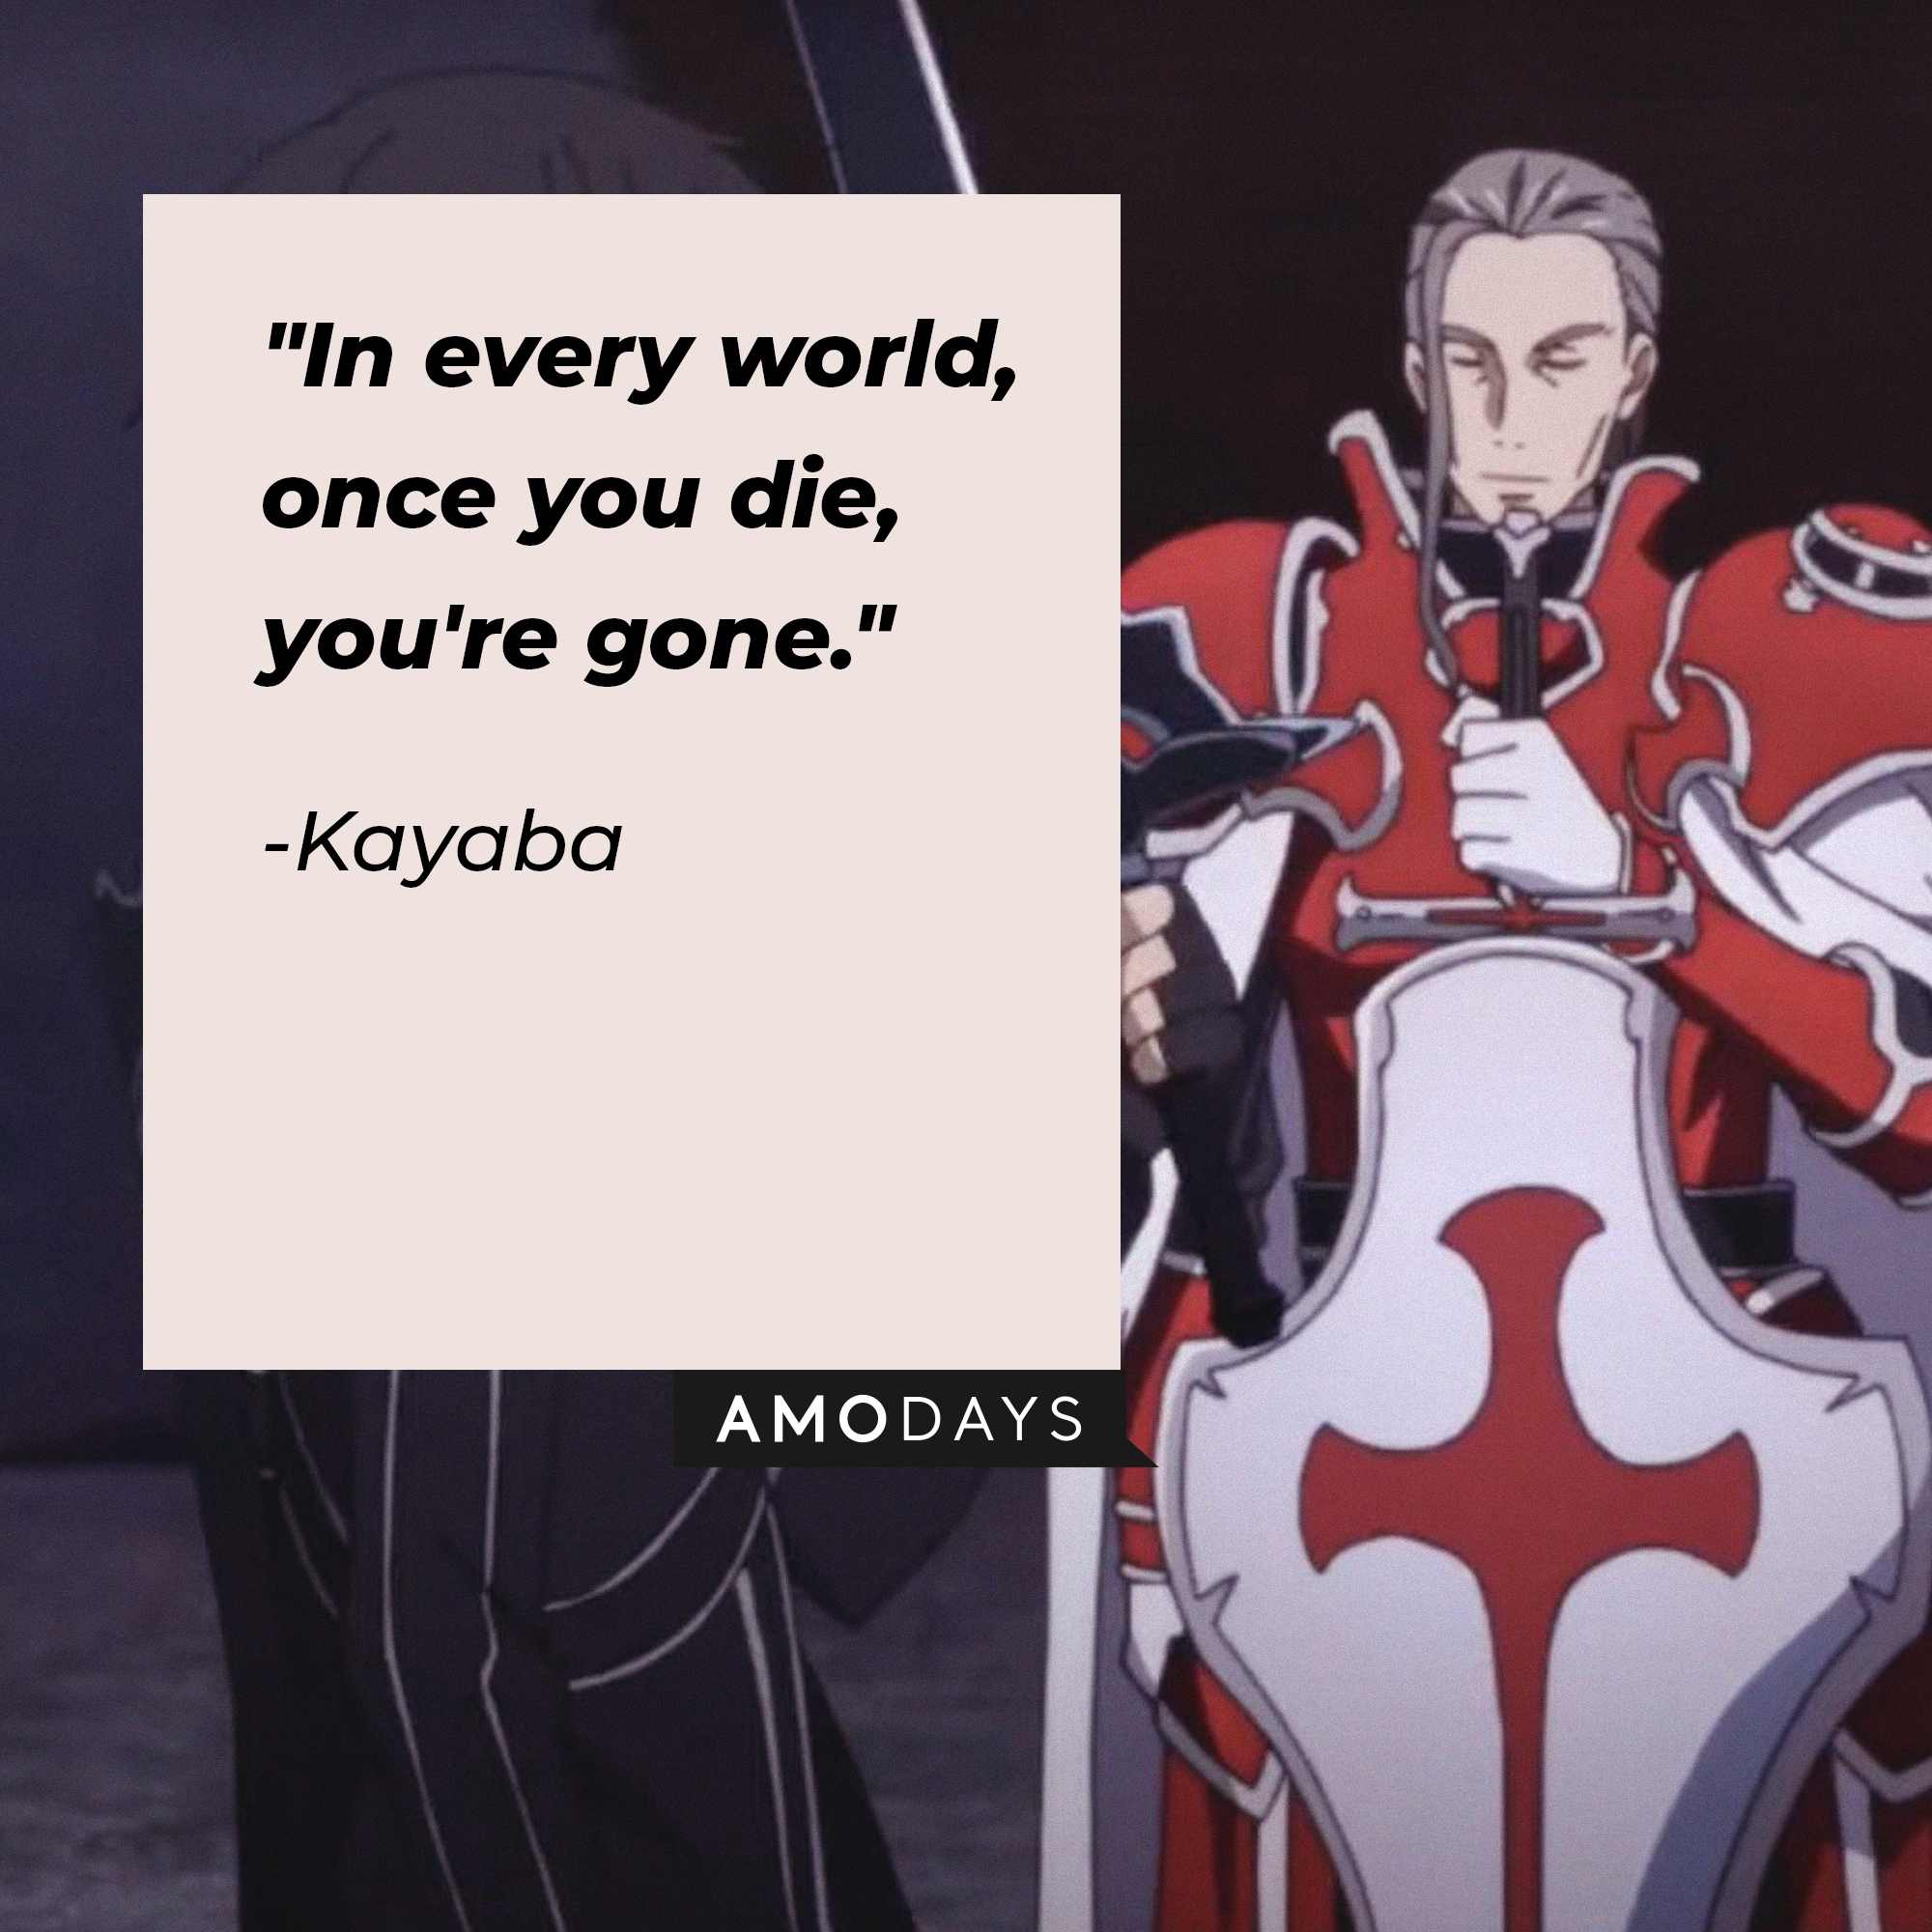 Kayaba's quote: "In every world, once you die, you're gone." | Source: Facebook.com/SwordArtOnlineUSA